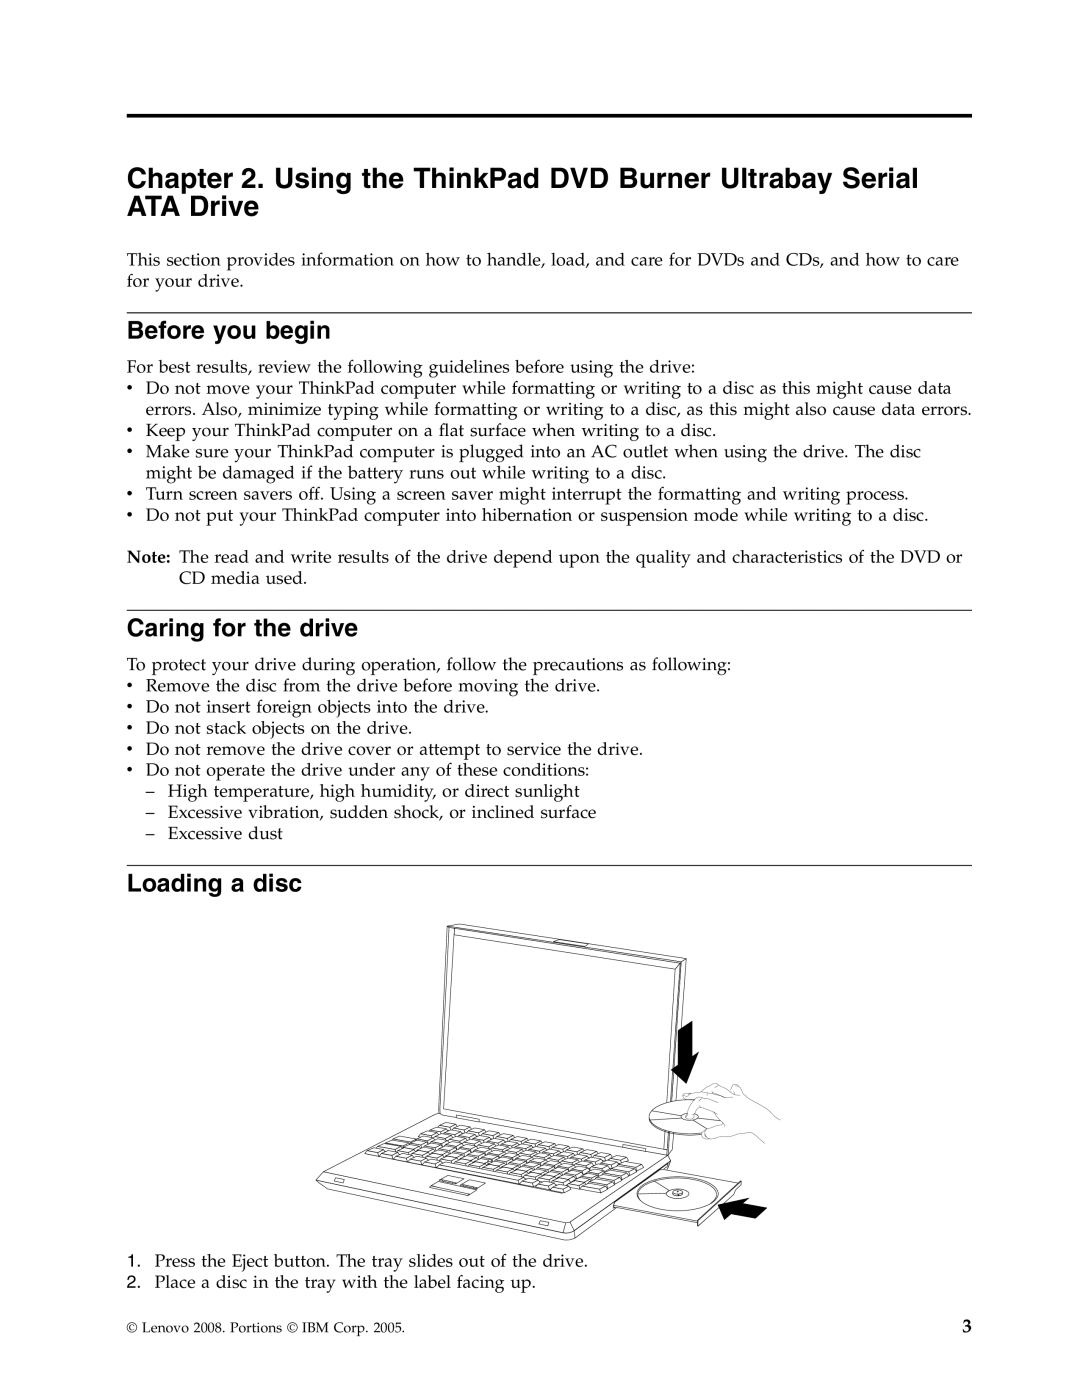 Lenovo 43N3222 manual Before you begin, Caring for the drive, Loading a disc 